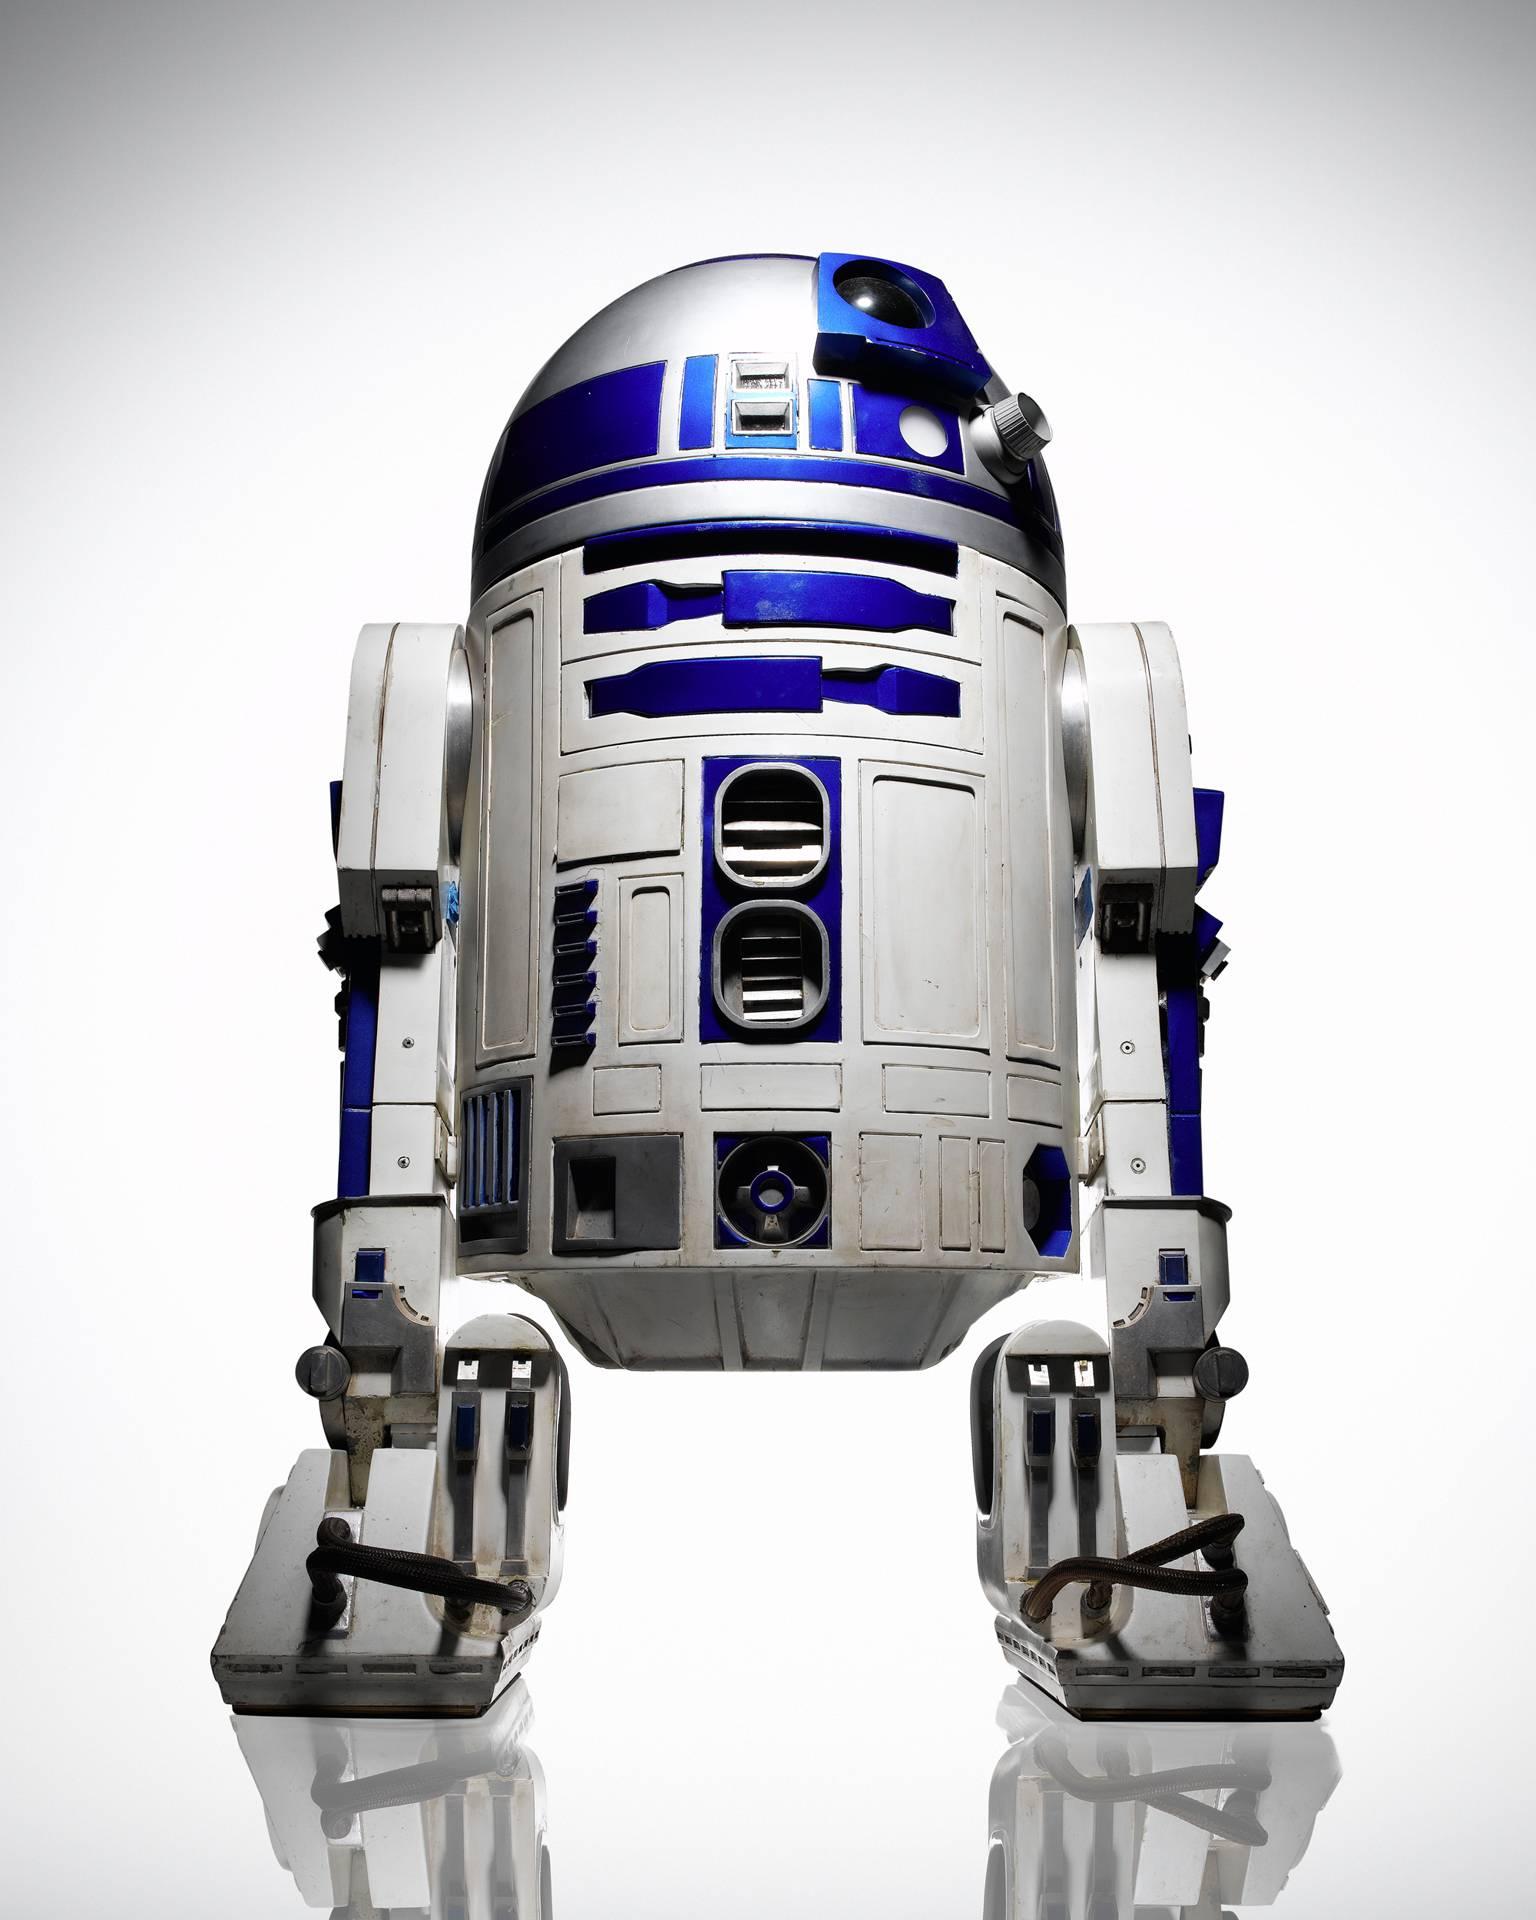 Star Wars ( R2-D2 ) - large format photograph of the original iconic droid robot